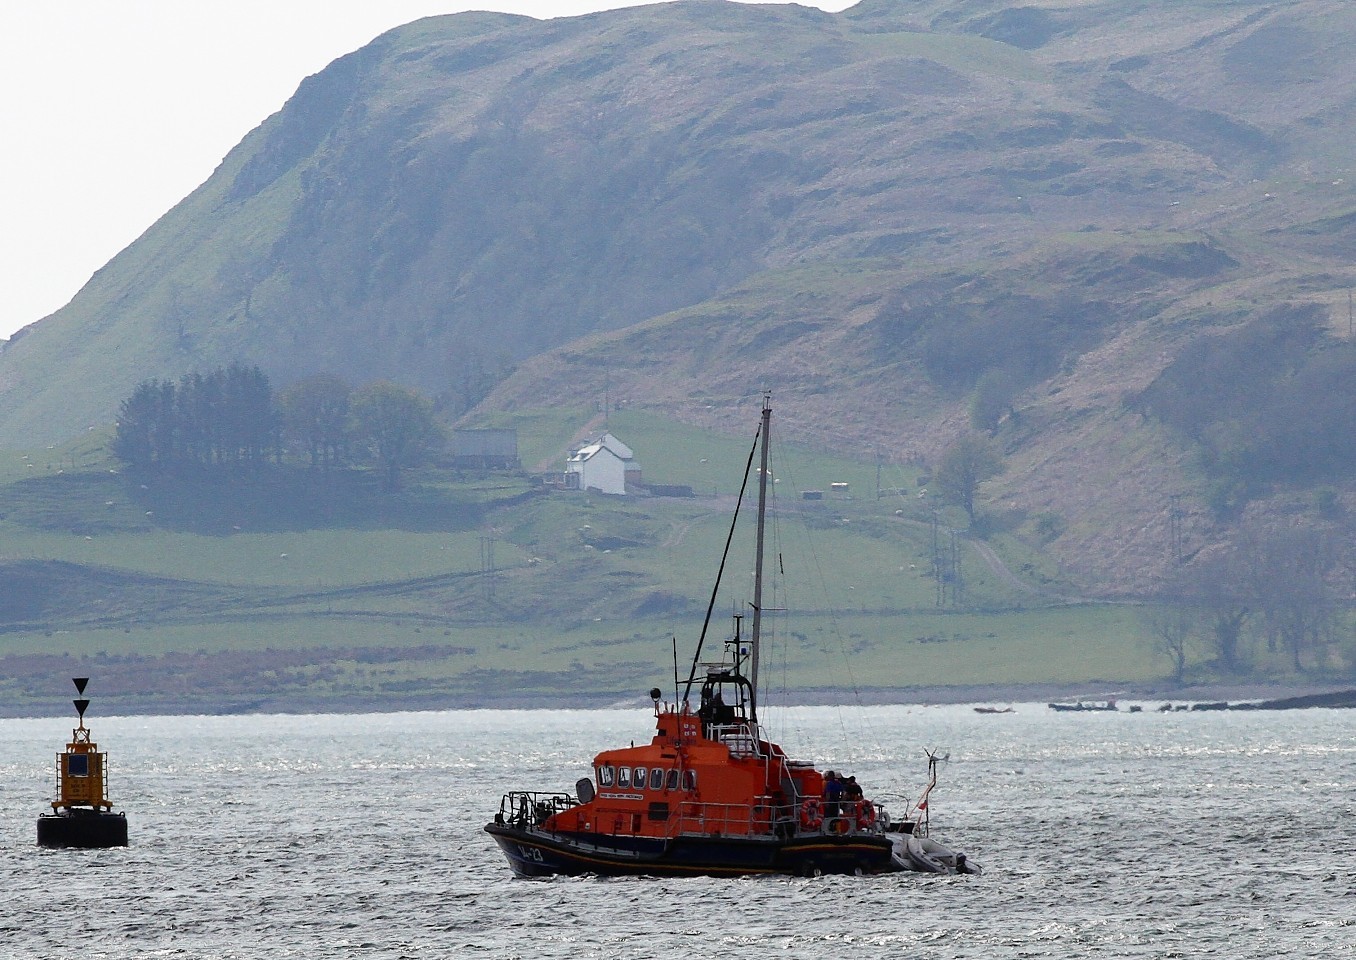 Oban lifeboat has had a busy day, following three call-outs